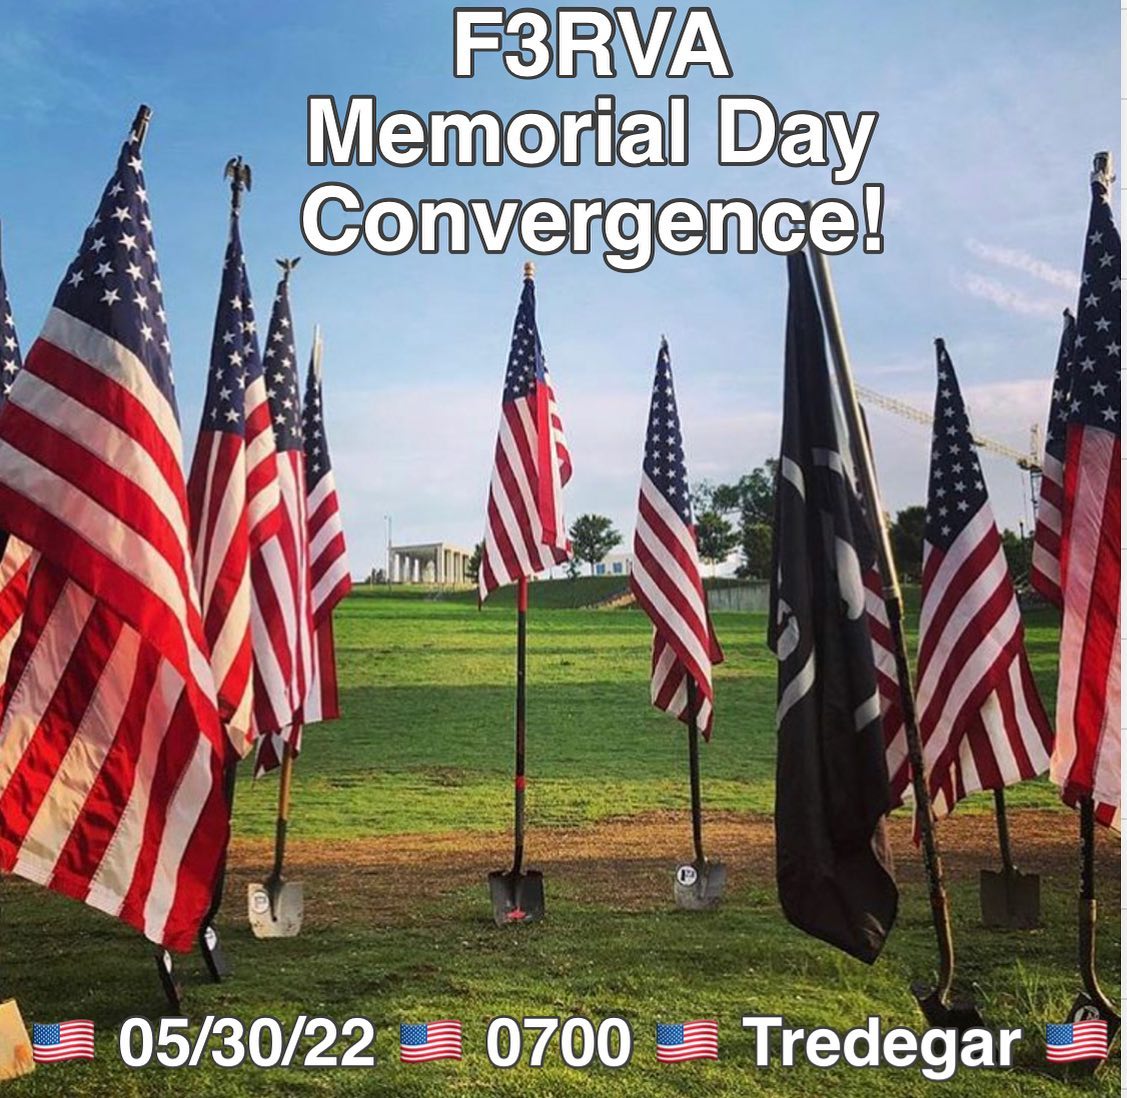 F3RVA Memorial Day Convergence!! 0700 at Tredegar/below the Virginia War Memorial. Meet in the parking lot under the tracks where people park to go to Belle Isle. Bring your shovel flag and a chair for 2ndF/Coffeteria after. See Gomer Pile for more details. 

Pre-Ruck at 0600 See Honeydo for more details